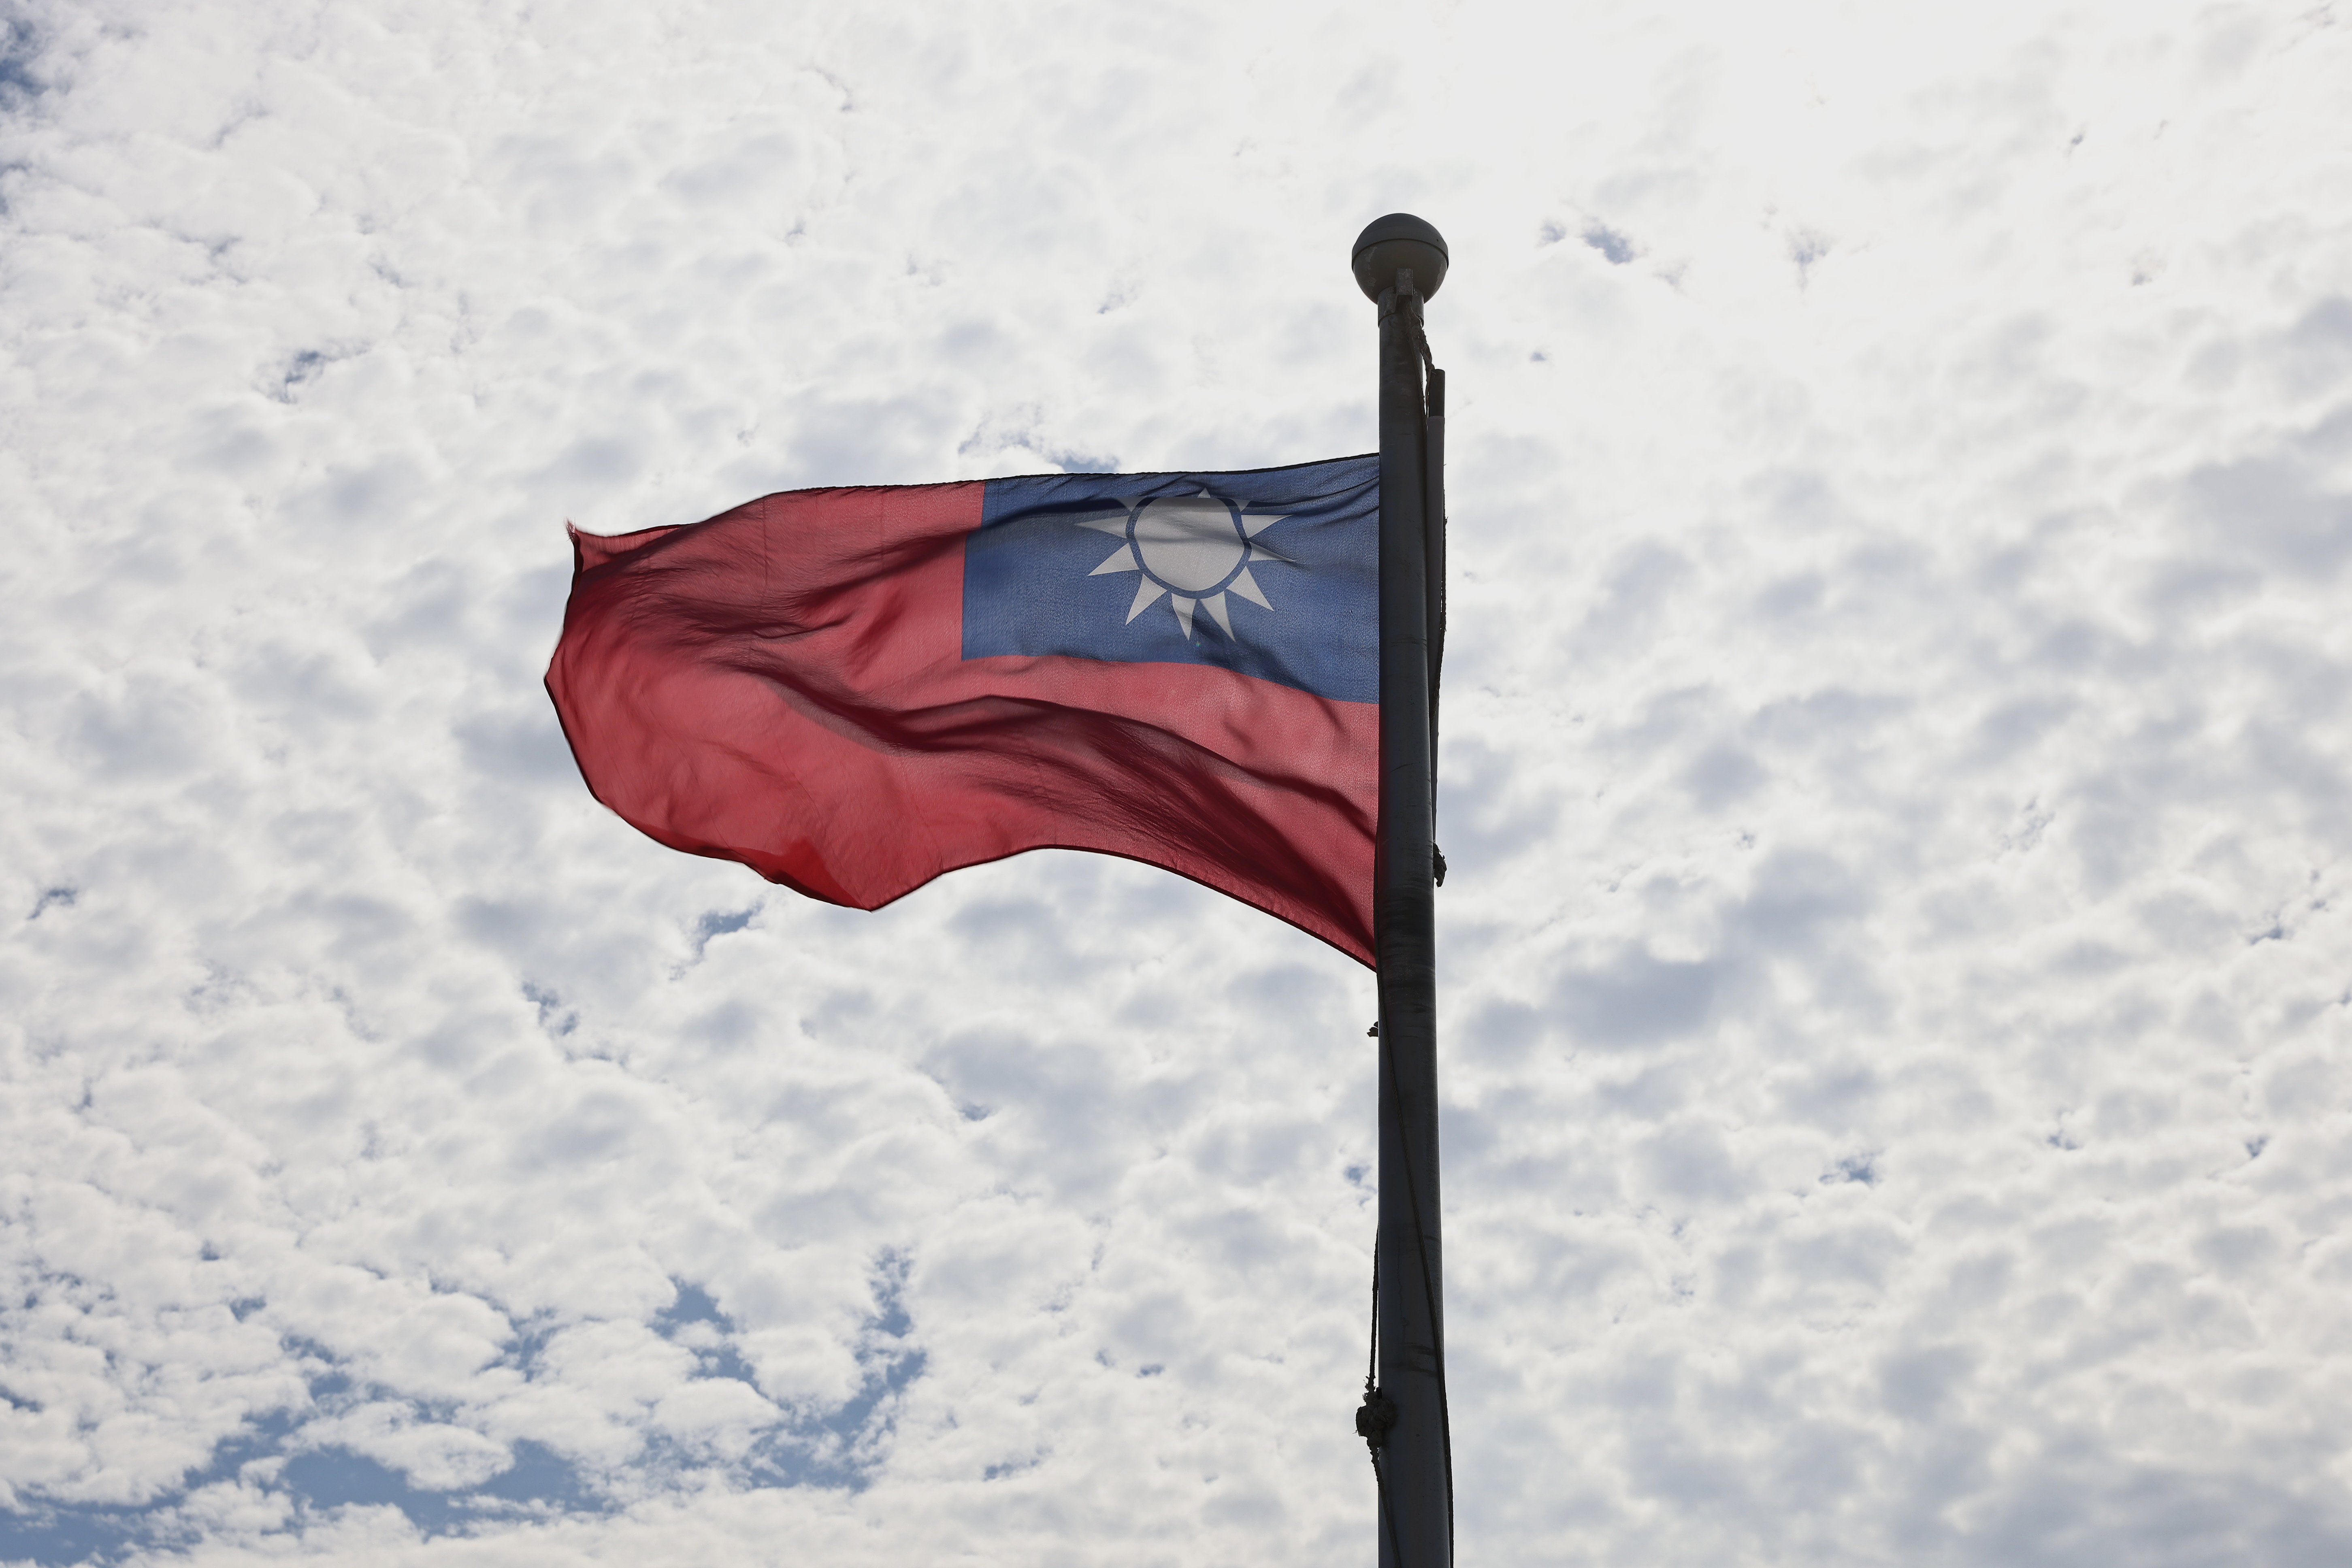 A Taiwanese flag flaps in the wind in Taoyuan, Taiwan, June 30, 2021. REUTERS/Ann Wang